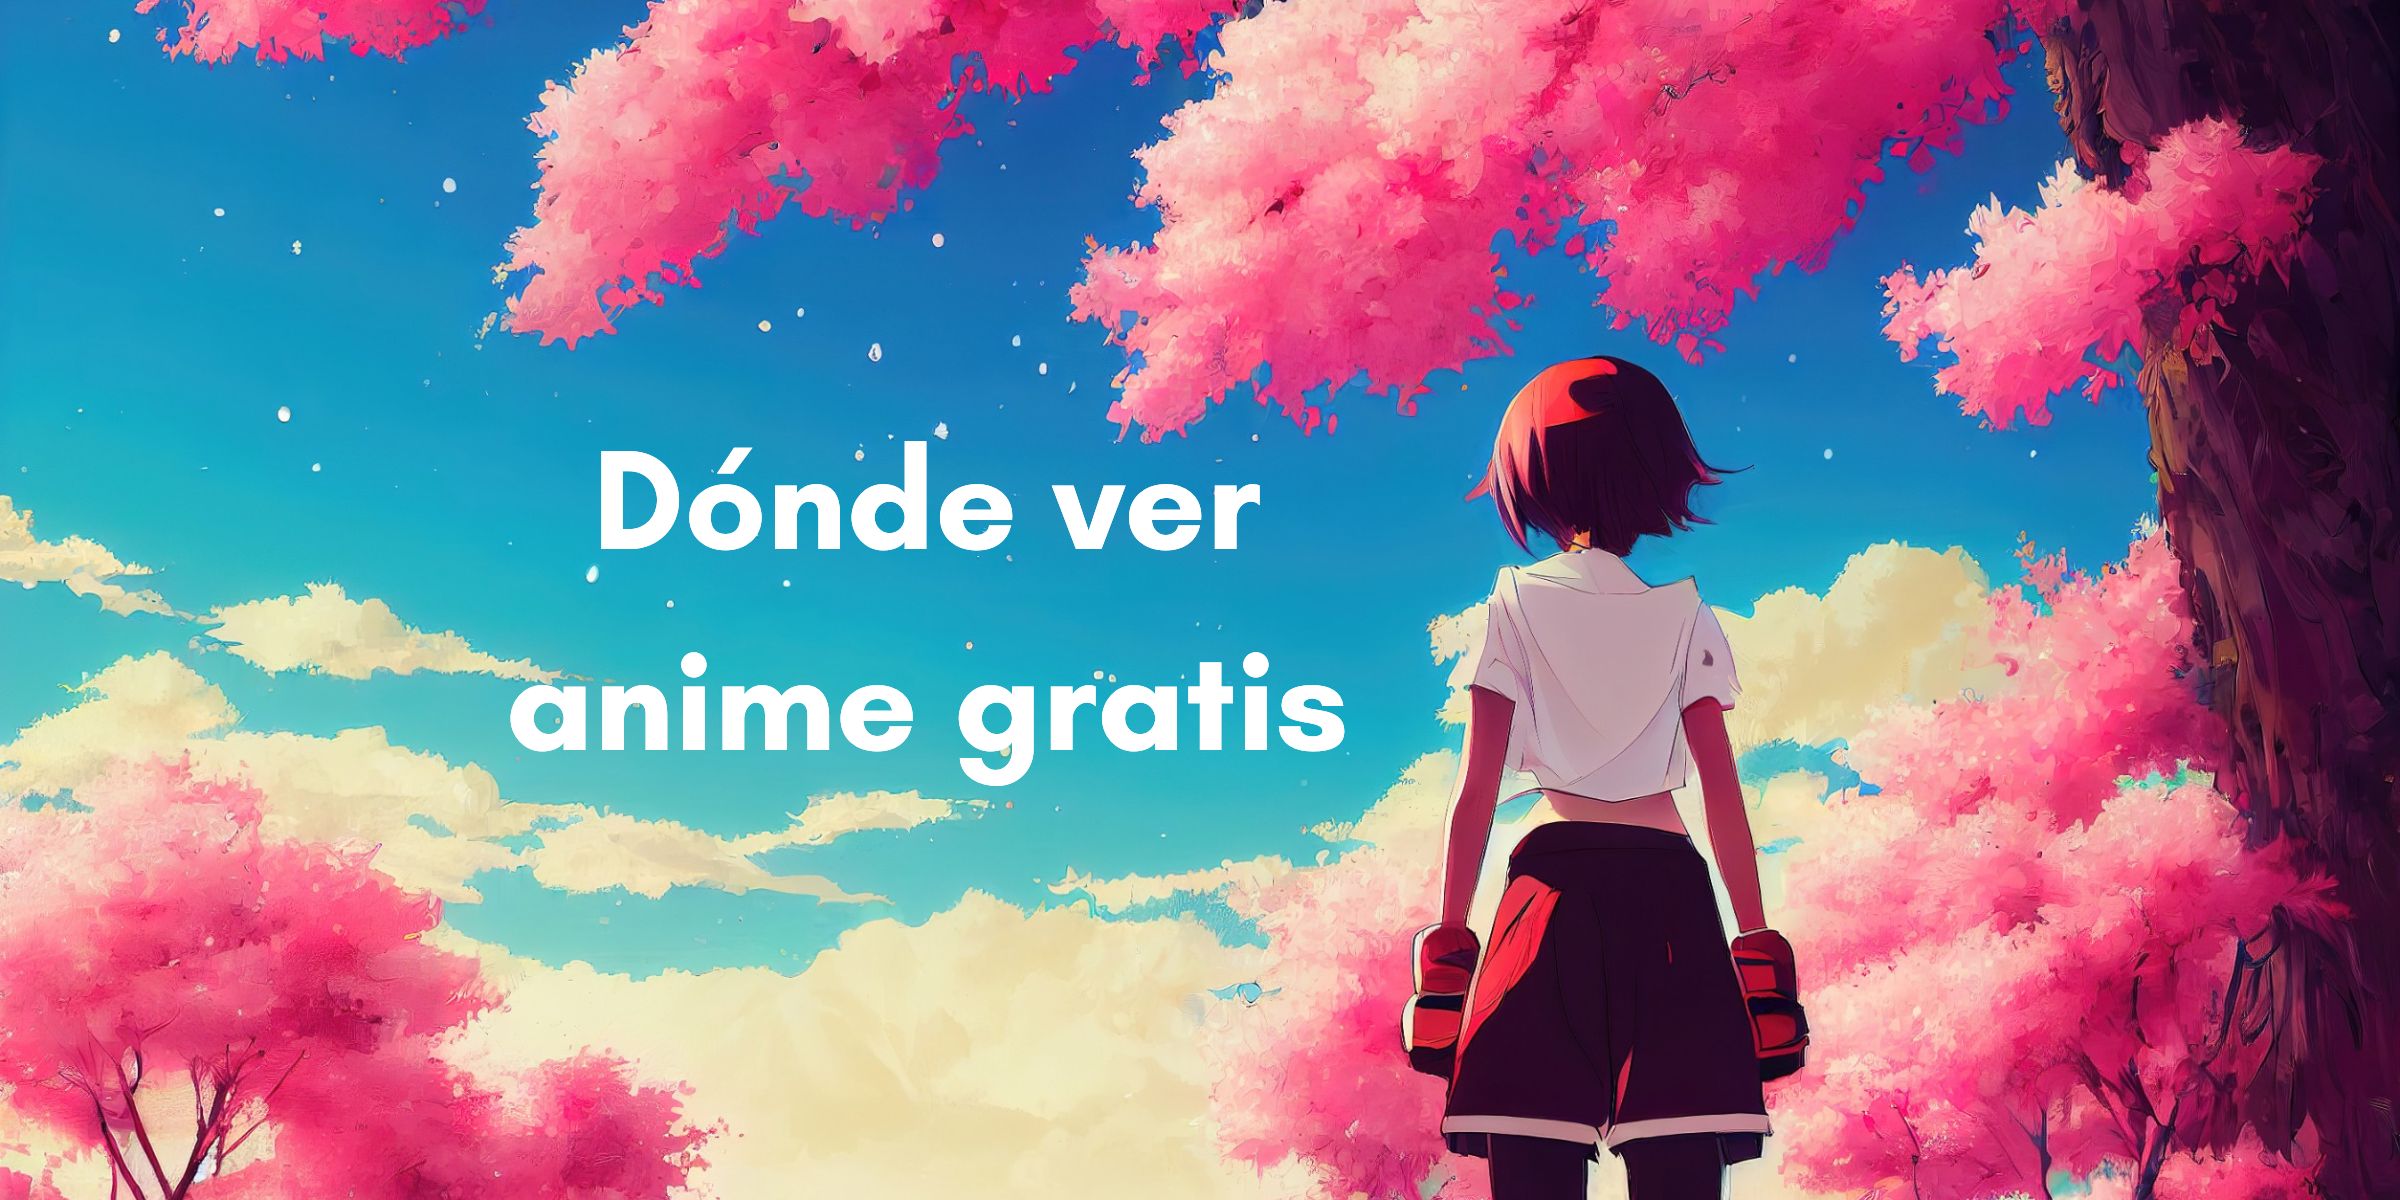 Best Websites To Watch Anime Online  FREE And Paid